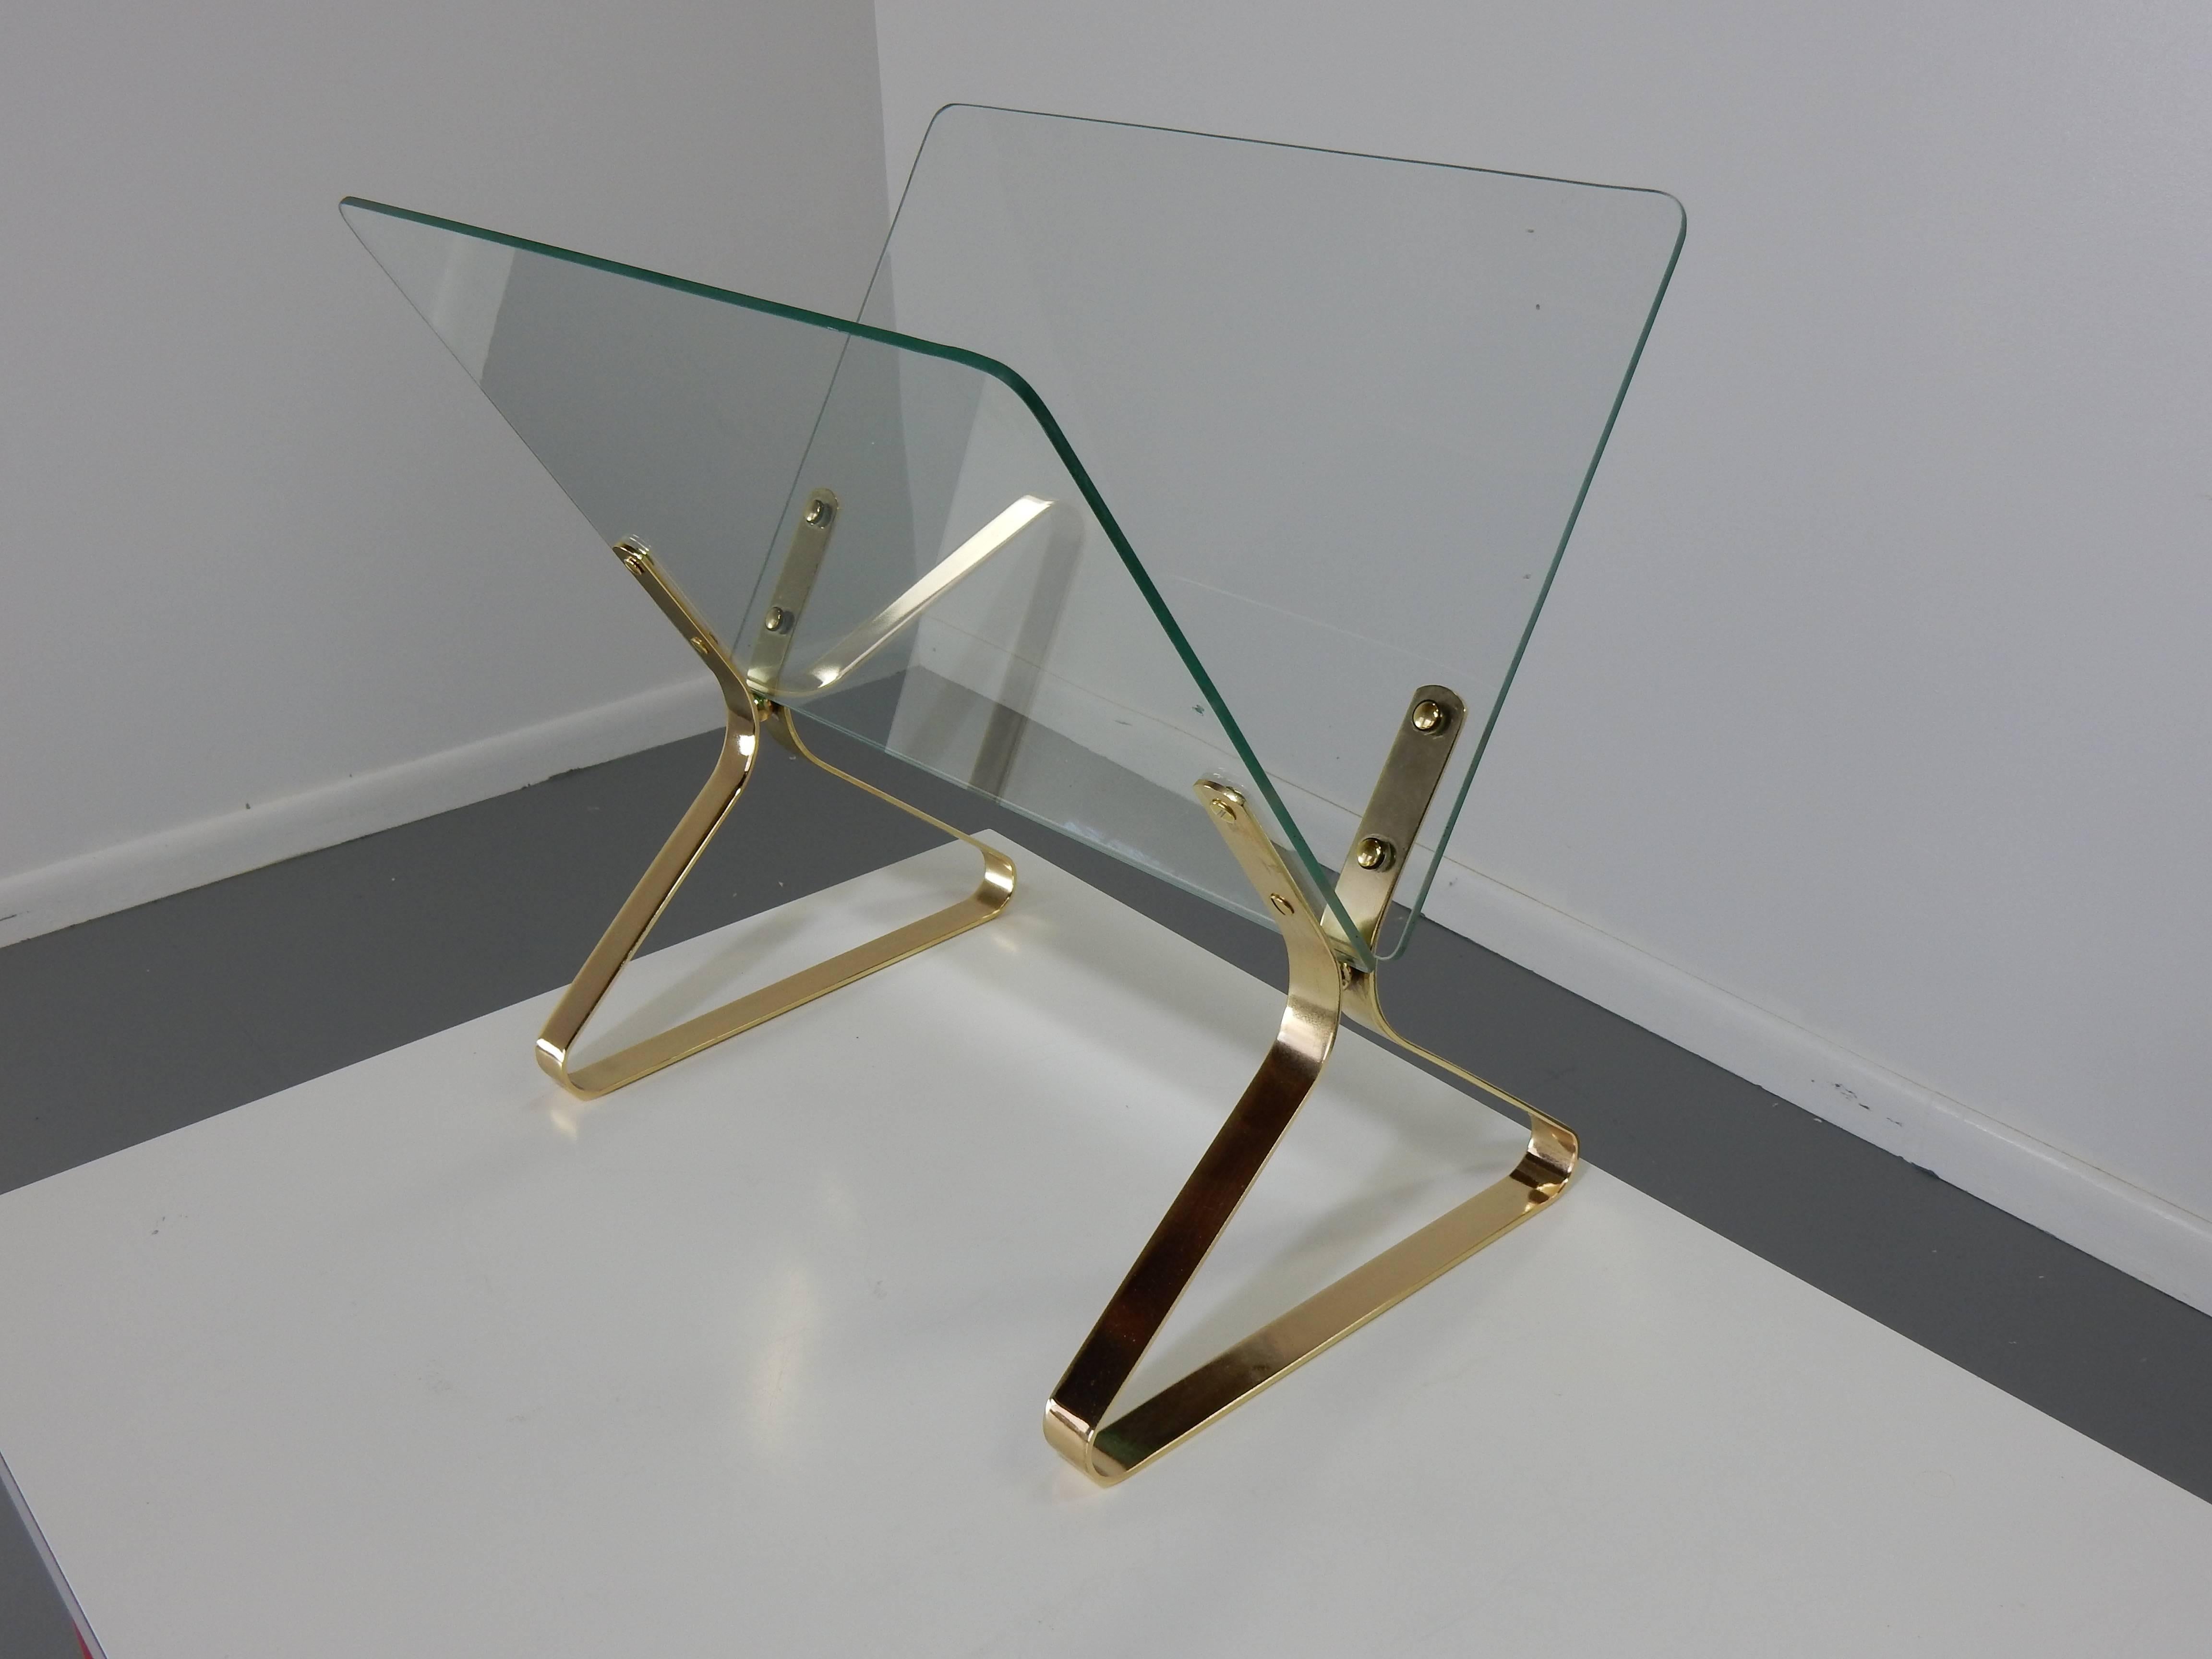 This is a glass and brass magazine rack by Milo Baughman. This rack will add a bit of luxury to any room.